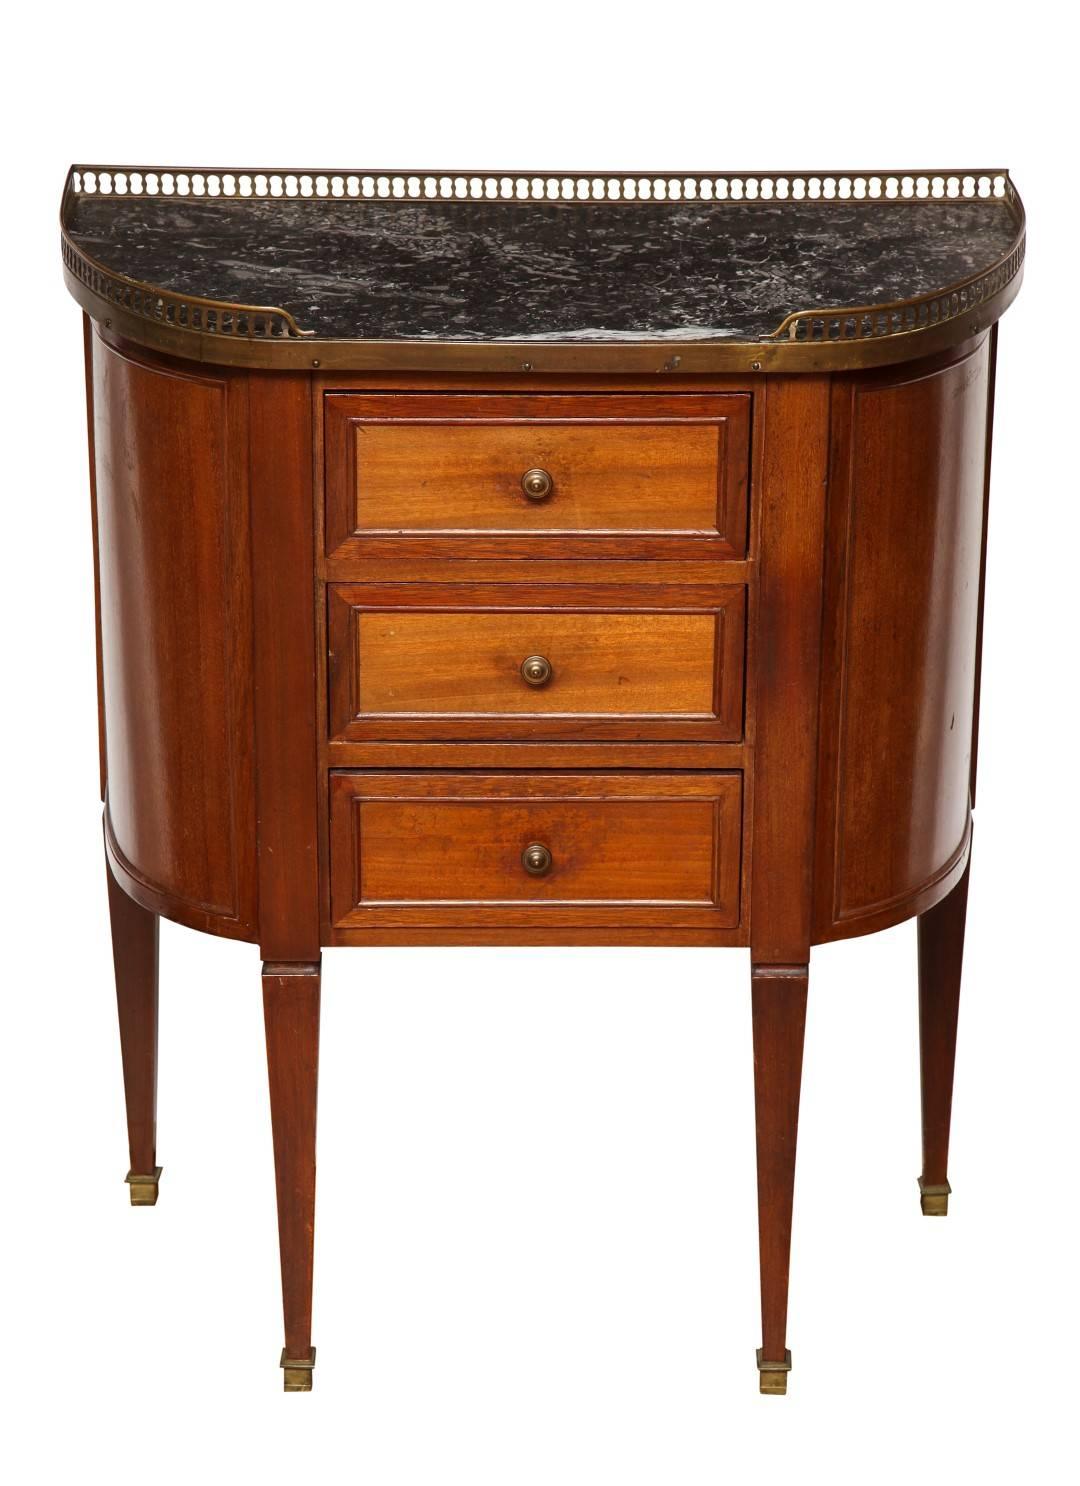 A pair of fruitwood bombe-form bedside tables, on Sheraton legs, the front with three drawers each with a circular metal pull. The top with a pierced metal gallery, surrounding a grey stone top.